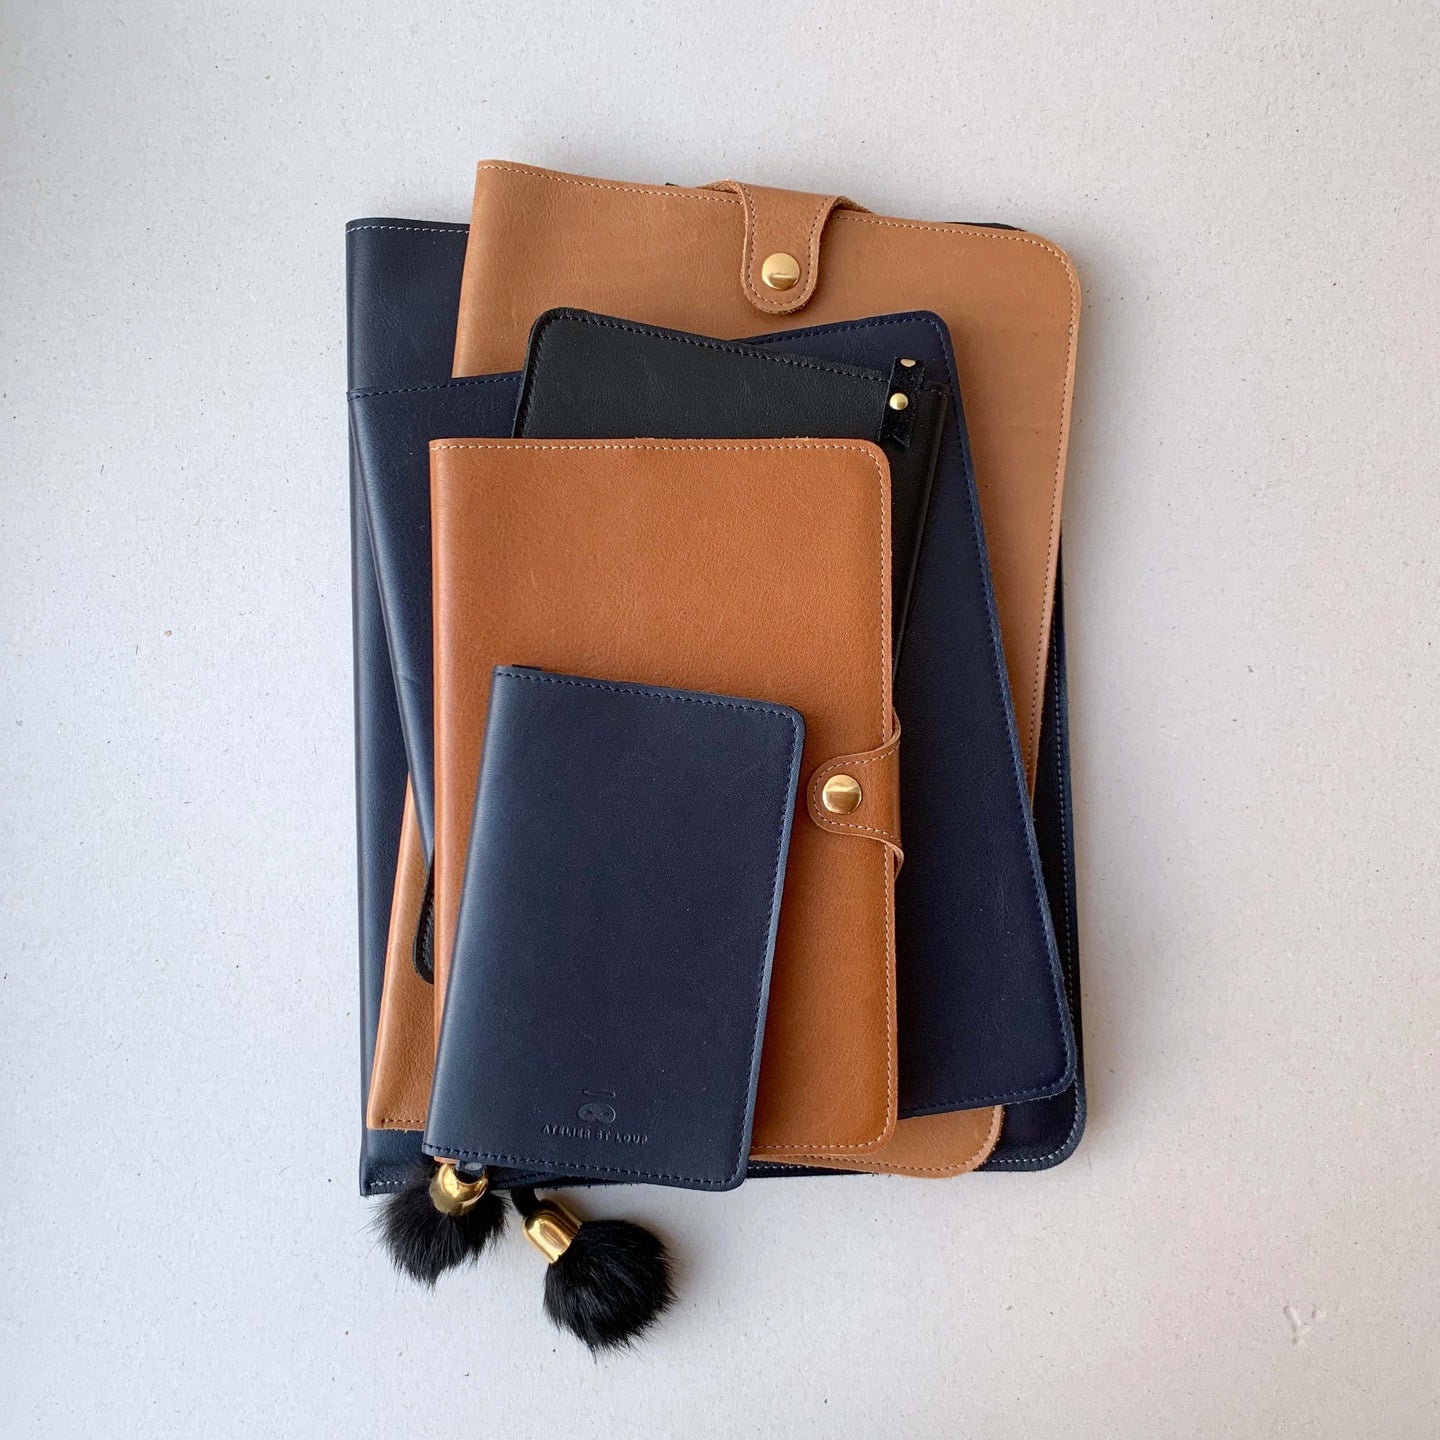 Moleskine & notebook covers for Her